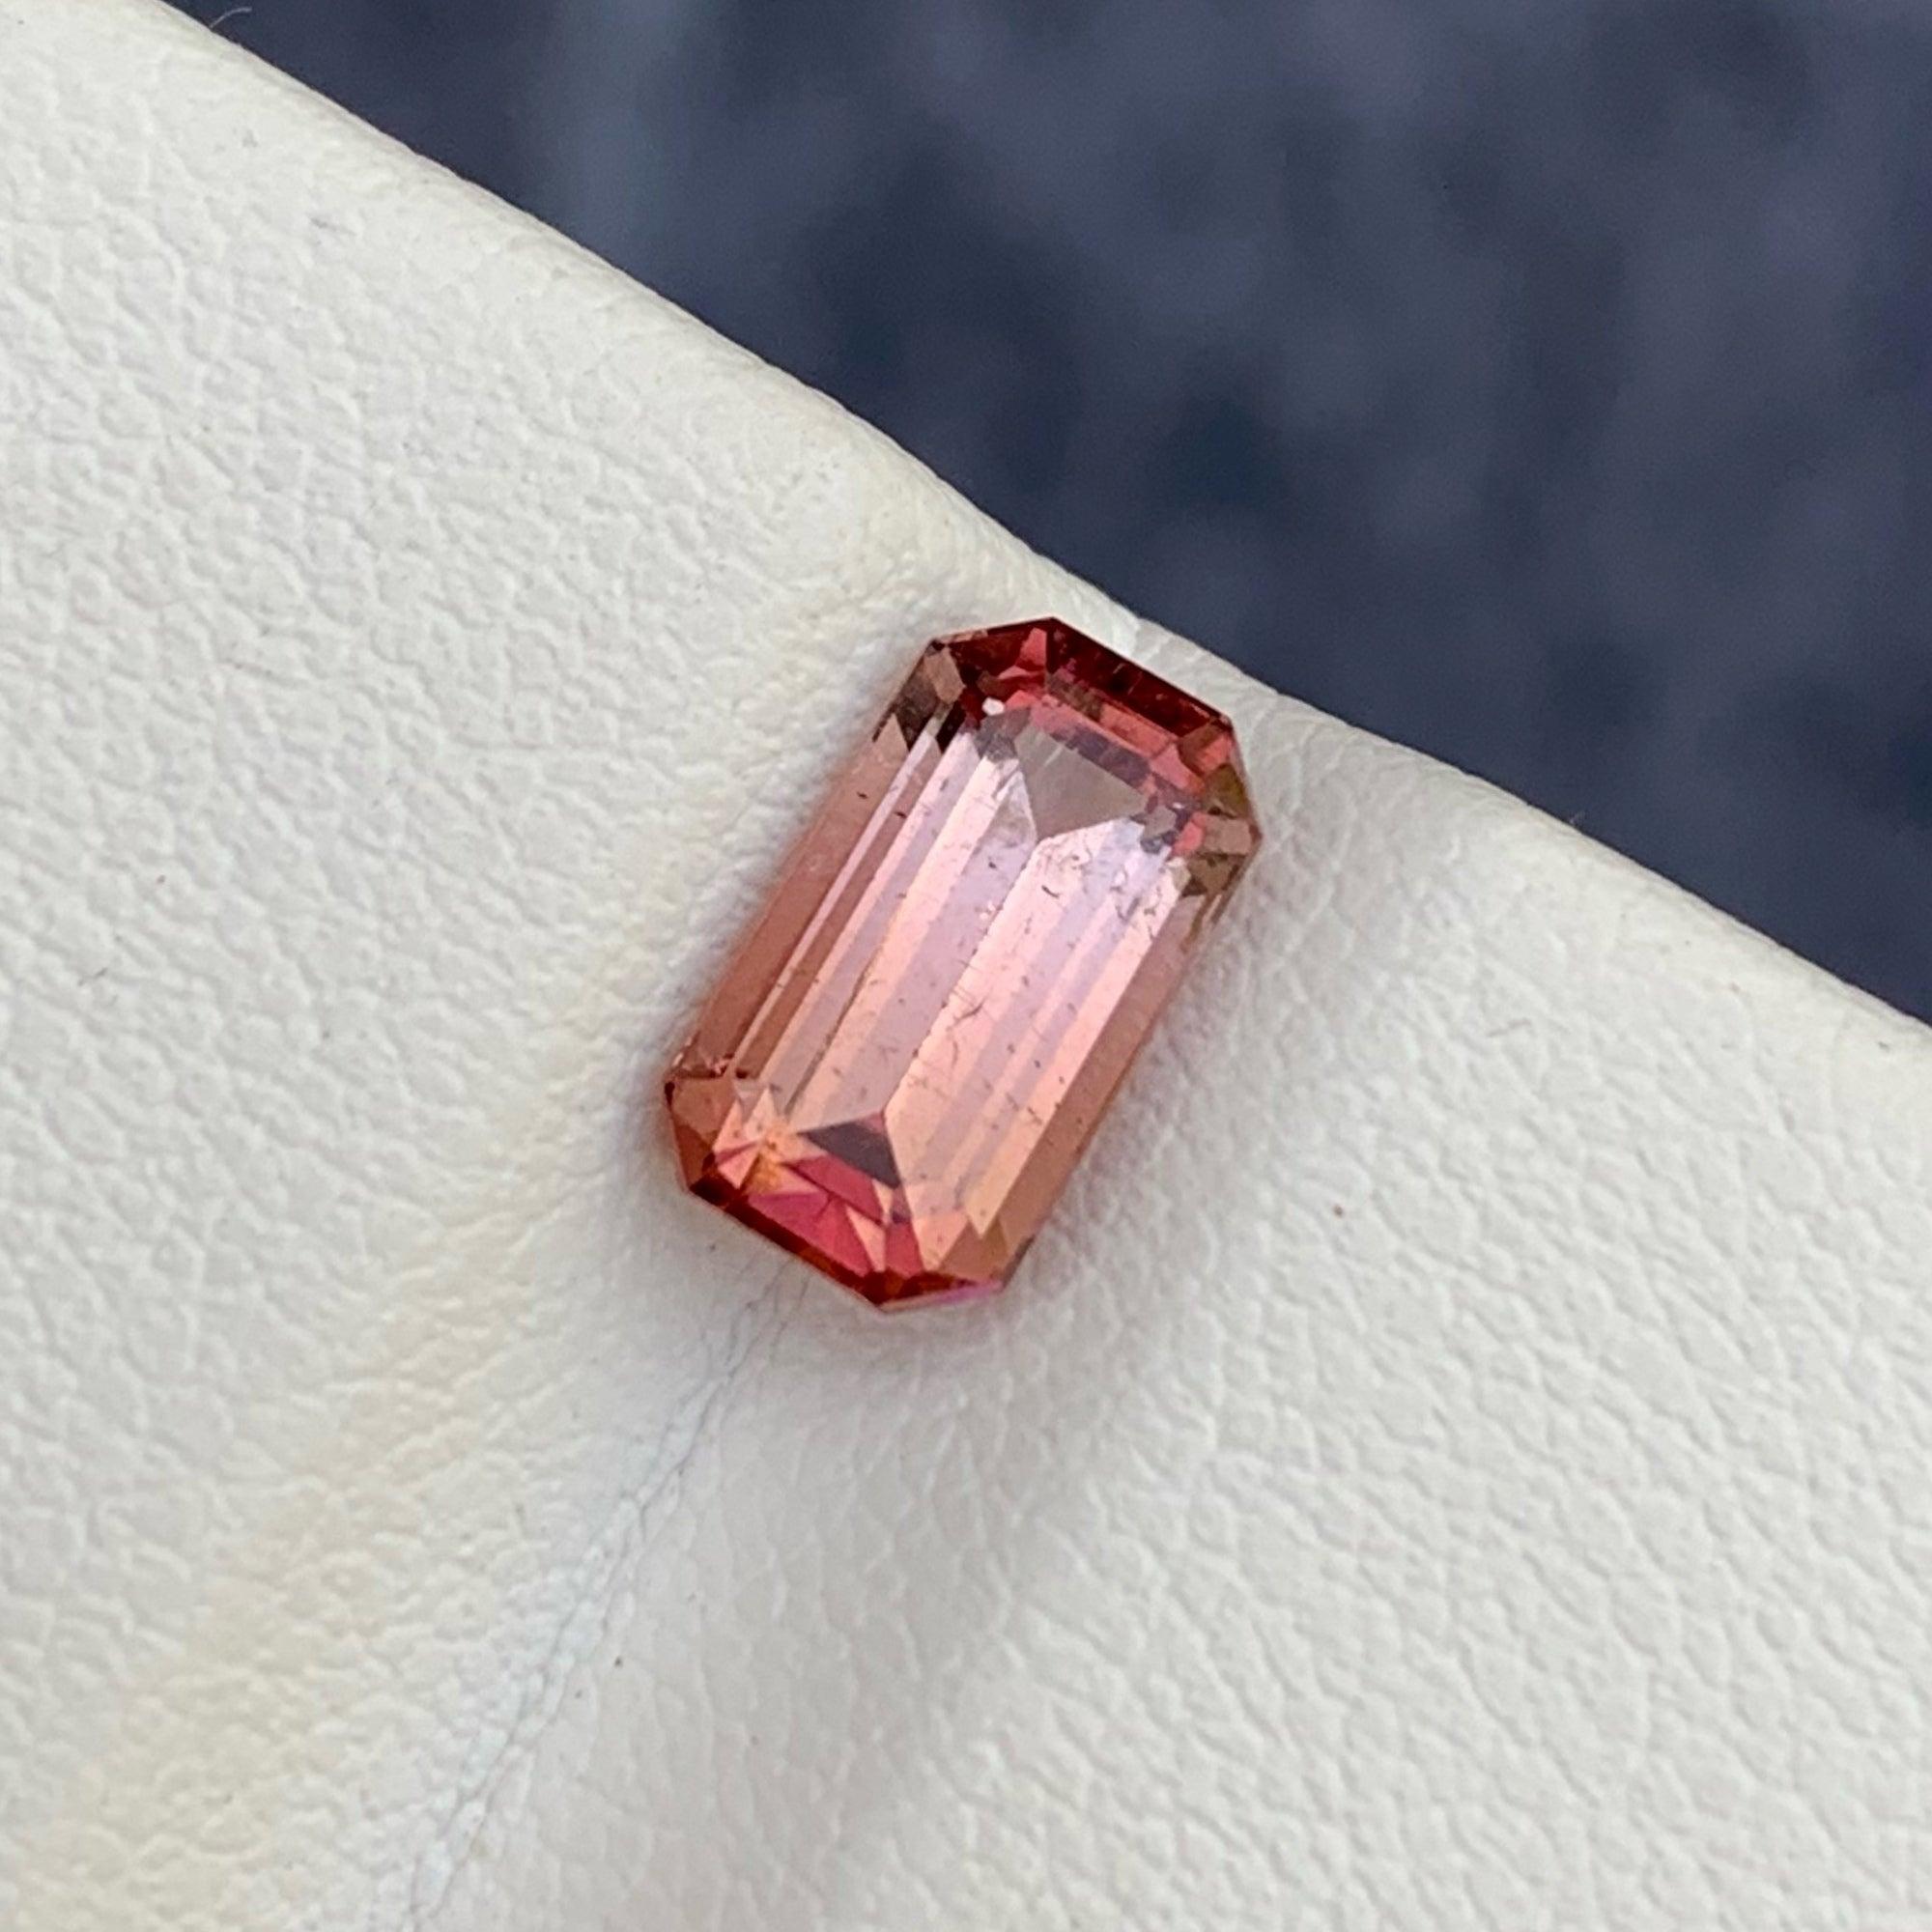 Amazing Brownish Red Tourmaline Stone, Available For Sale At Wholesale Price Natural High Quality 1.85 Carats Natural Loose Tourmaline From Africa.

Product Information:
PRODUCT NAME:	Amazing Brownish Red Tourmaline Stone
WEIGHT:	1.85